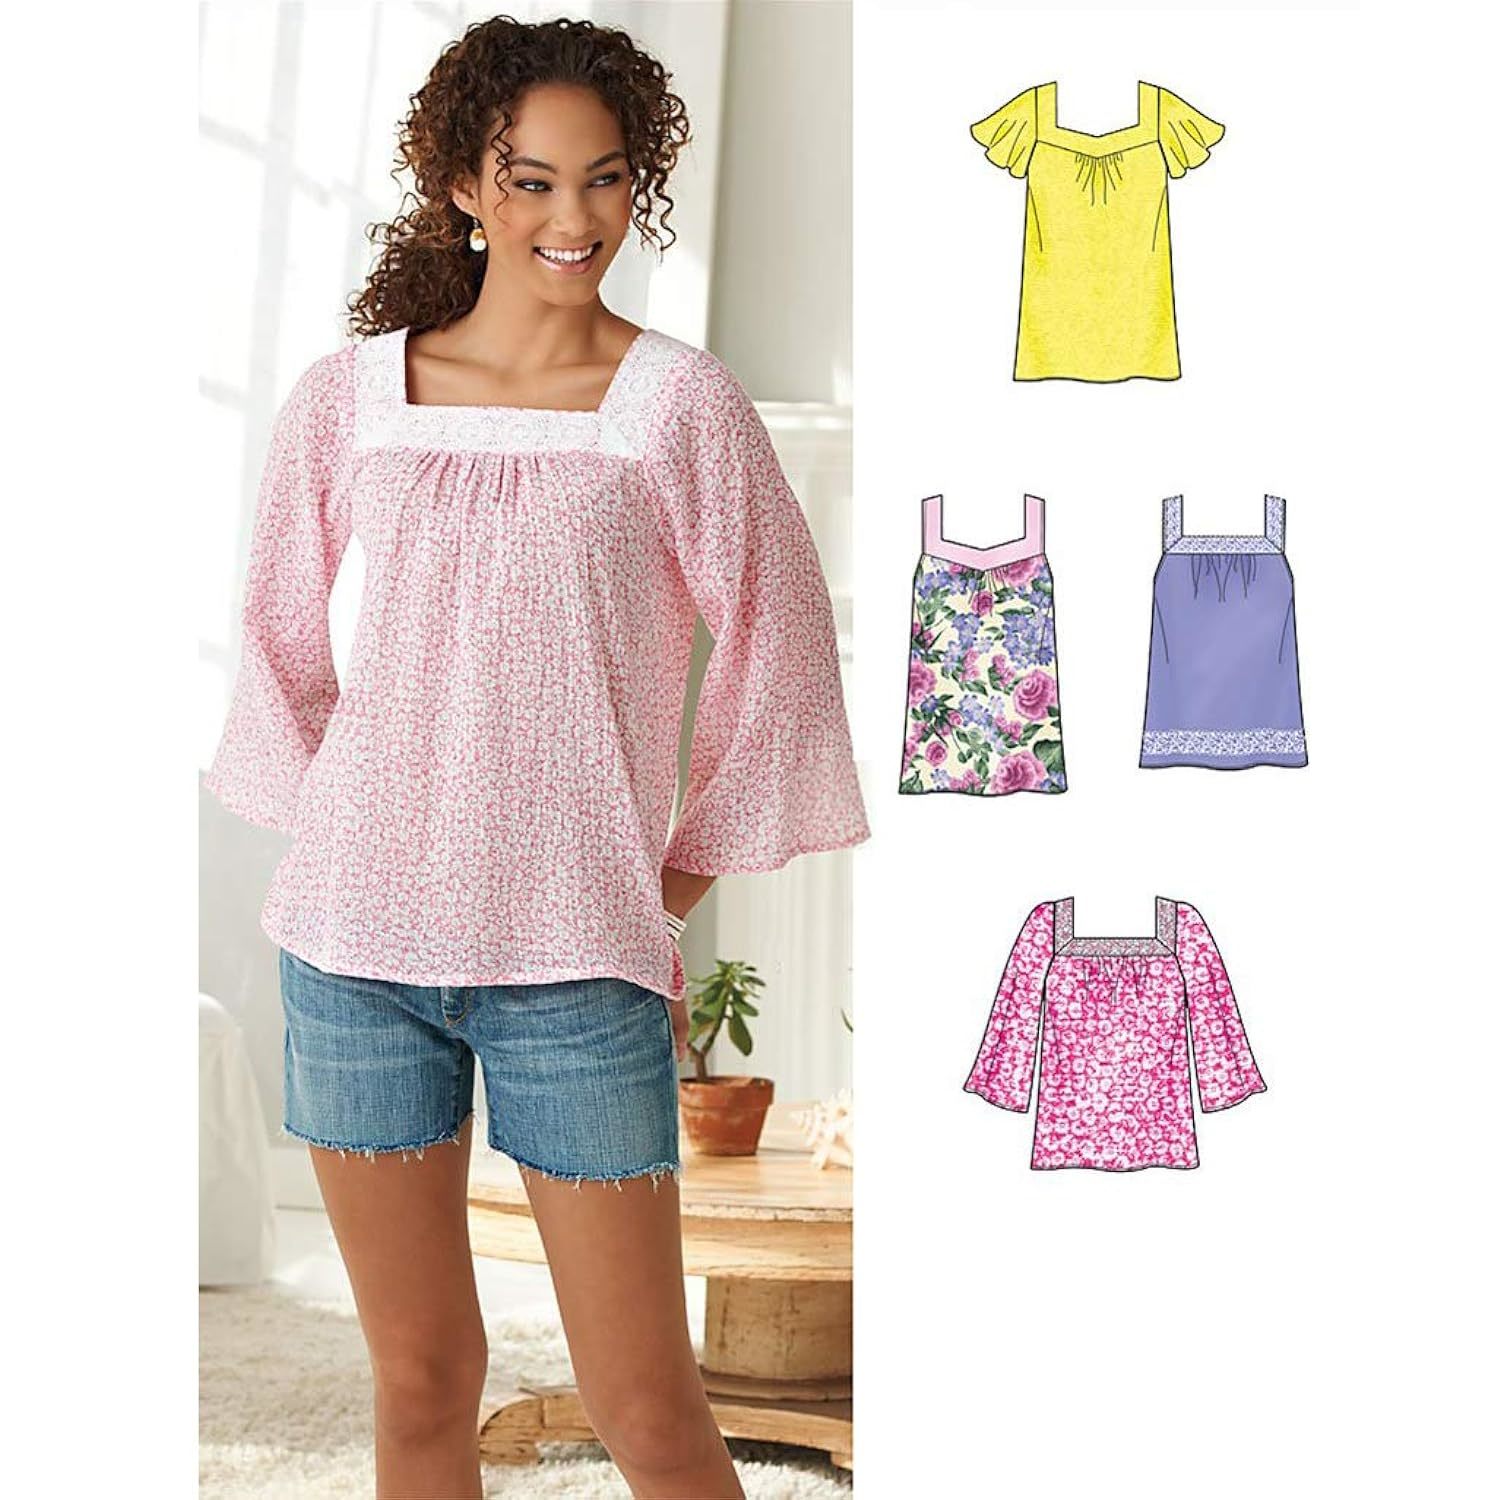 Primary image for Simplicity Creative Patterns New Look 6284 Misses' Pullover Top in Two Lengths, 